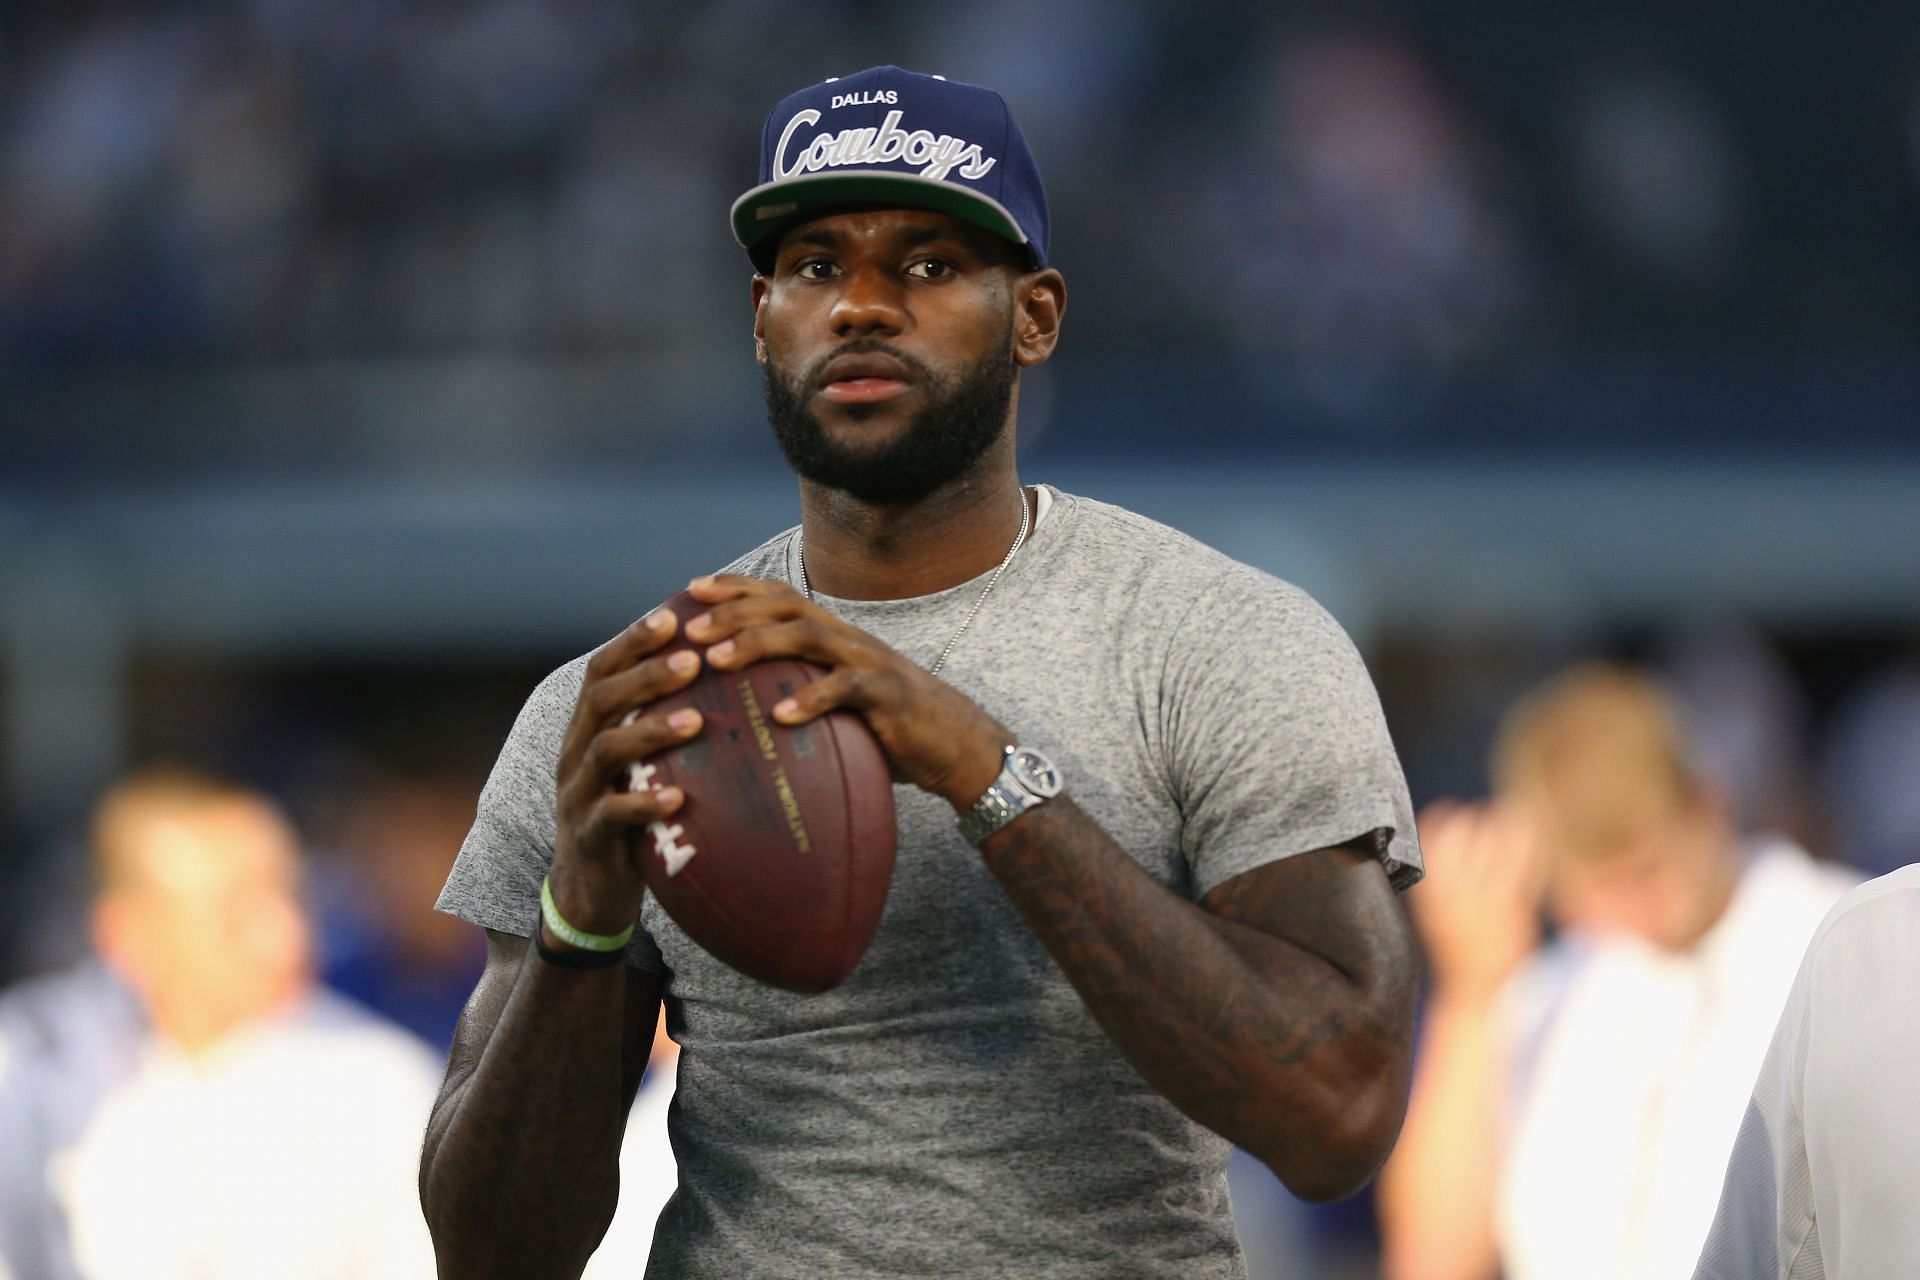 LeBron James back in 2011 at a Dallas Cowboys game